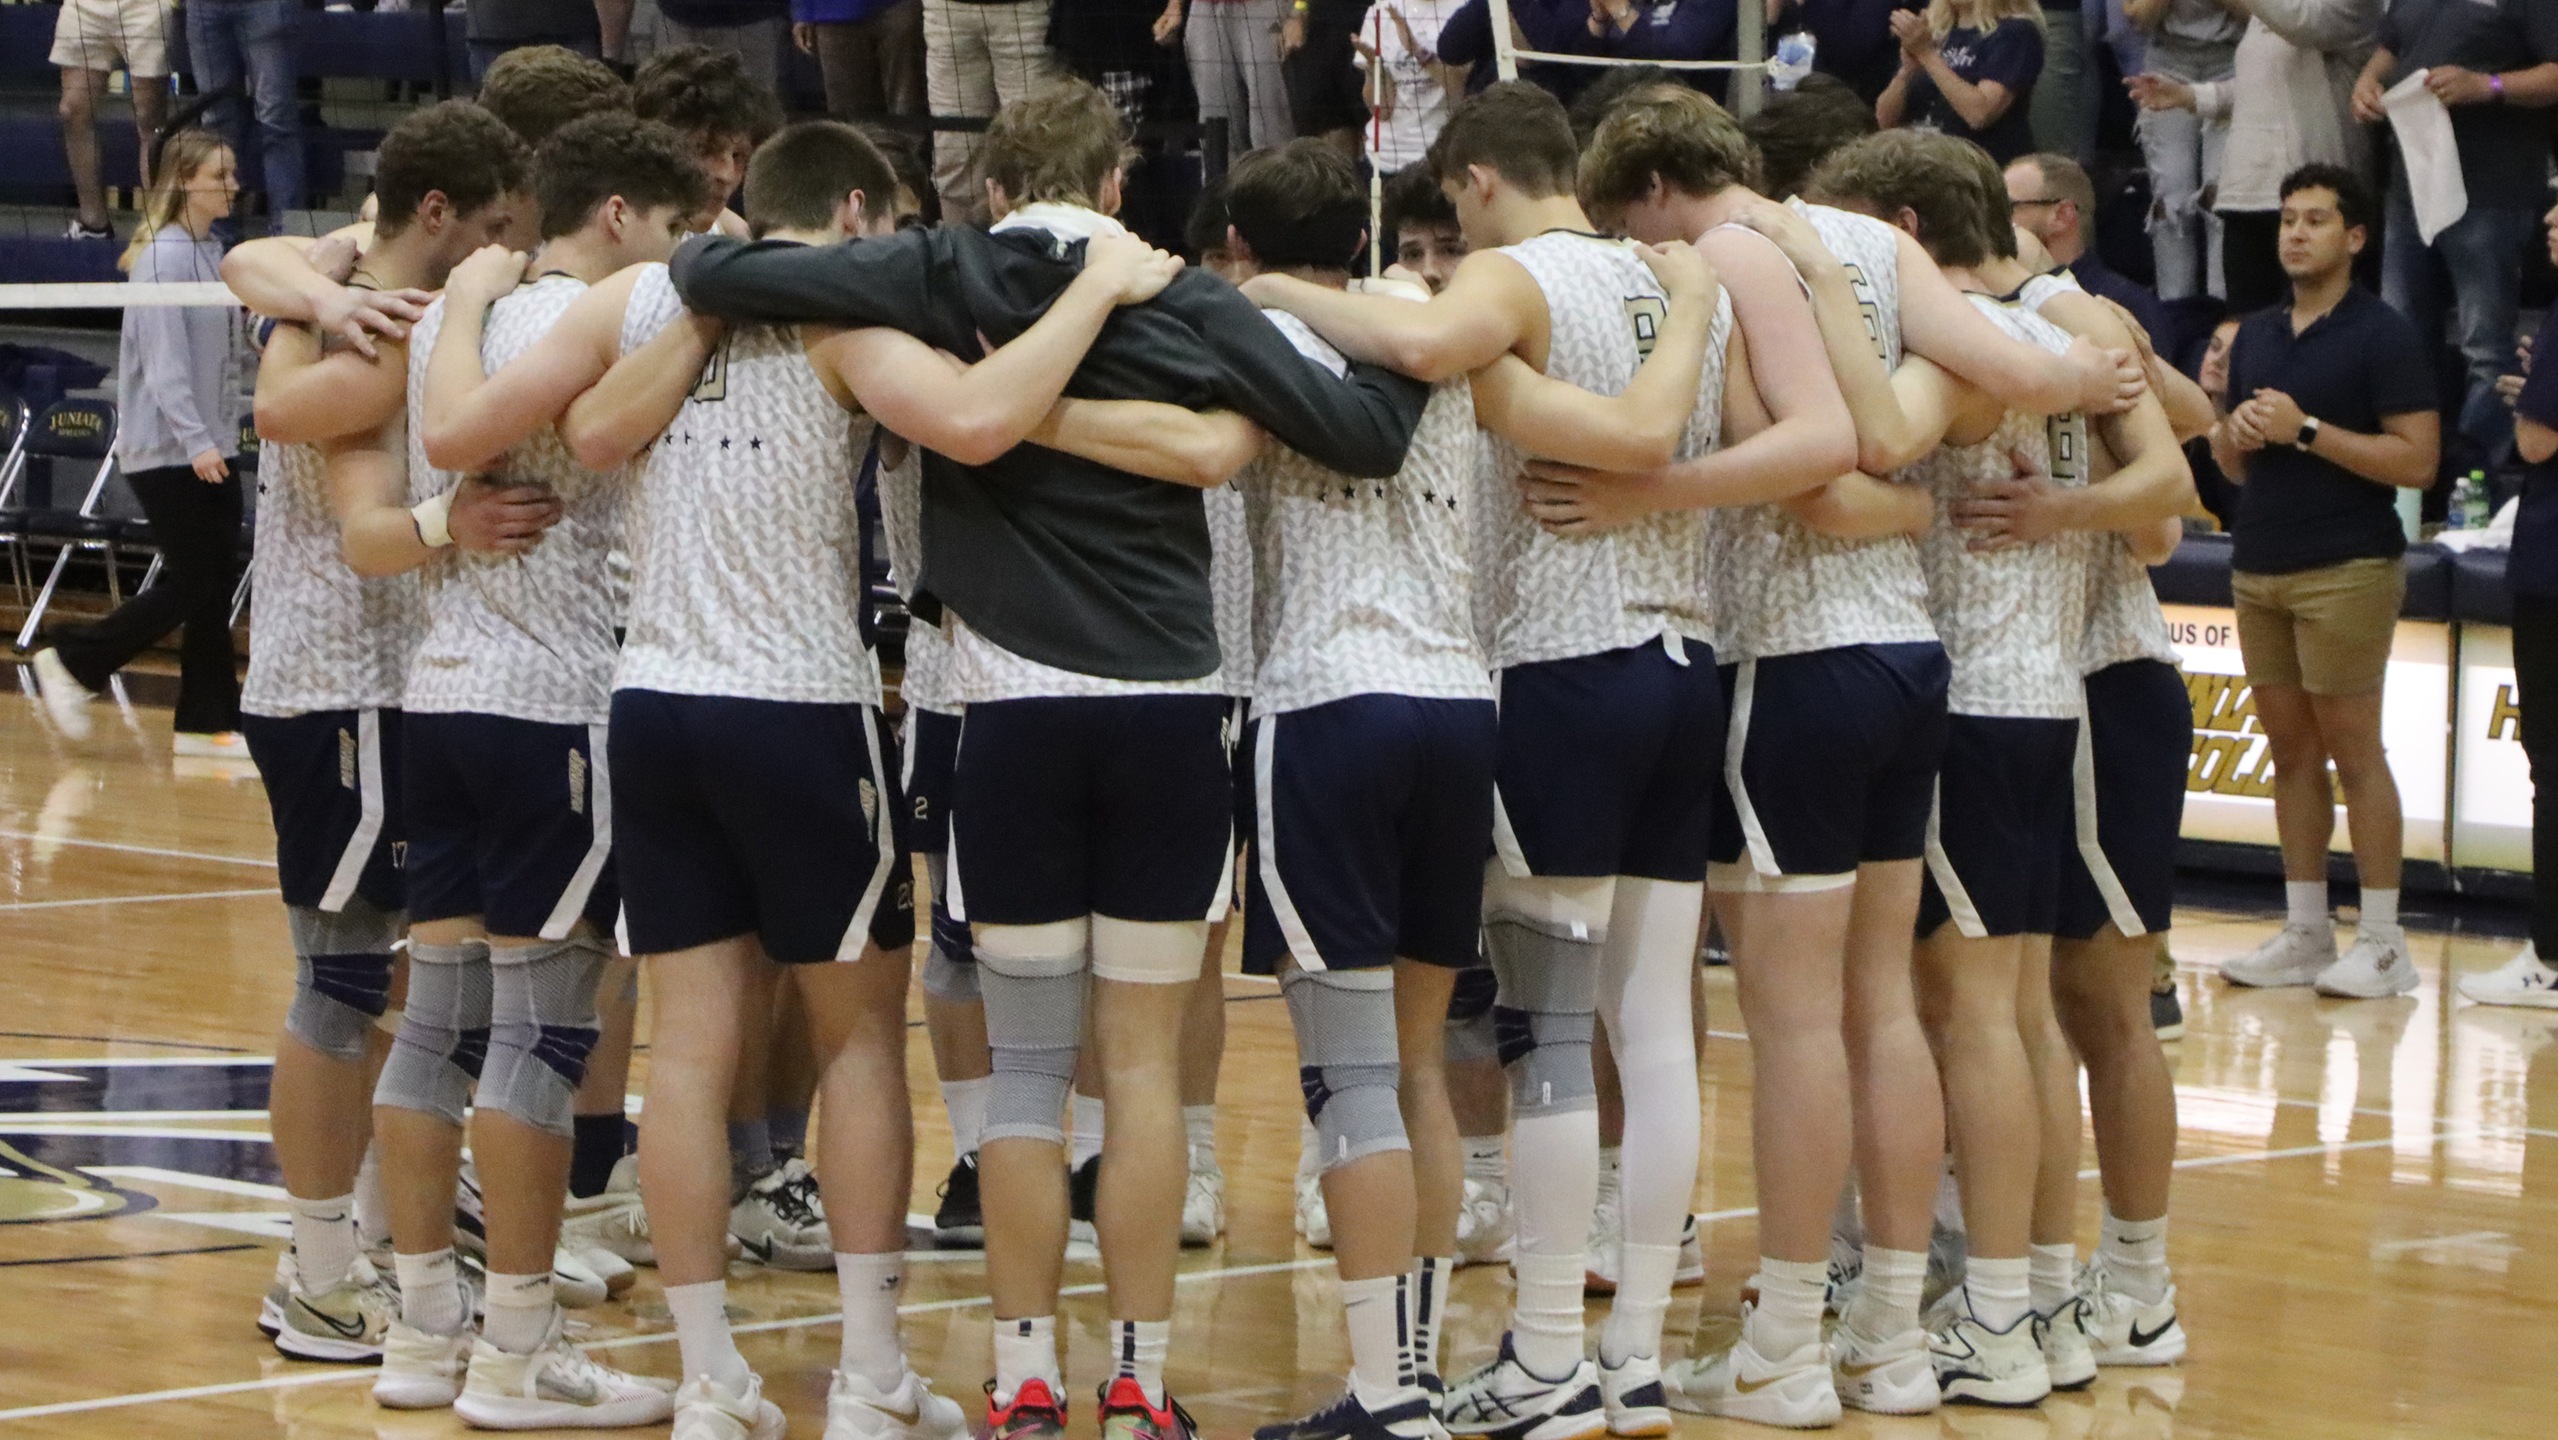 Men's Volleyball Falls to #4 Messiah in NCAA Quarterfinals